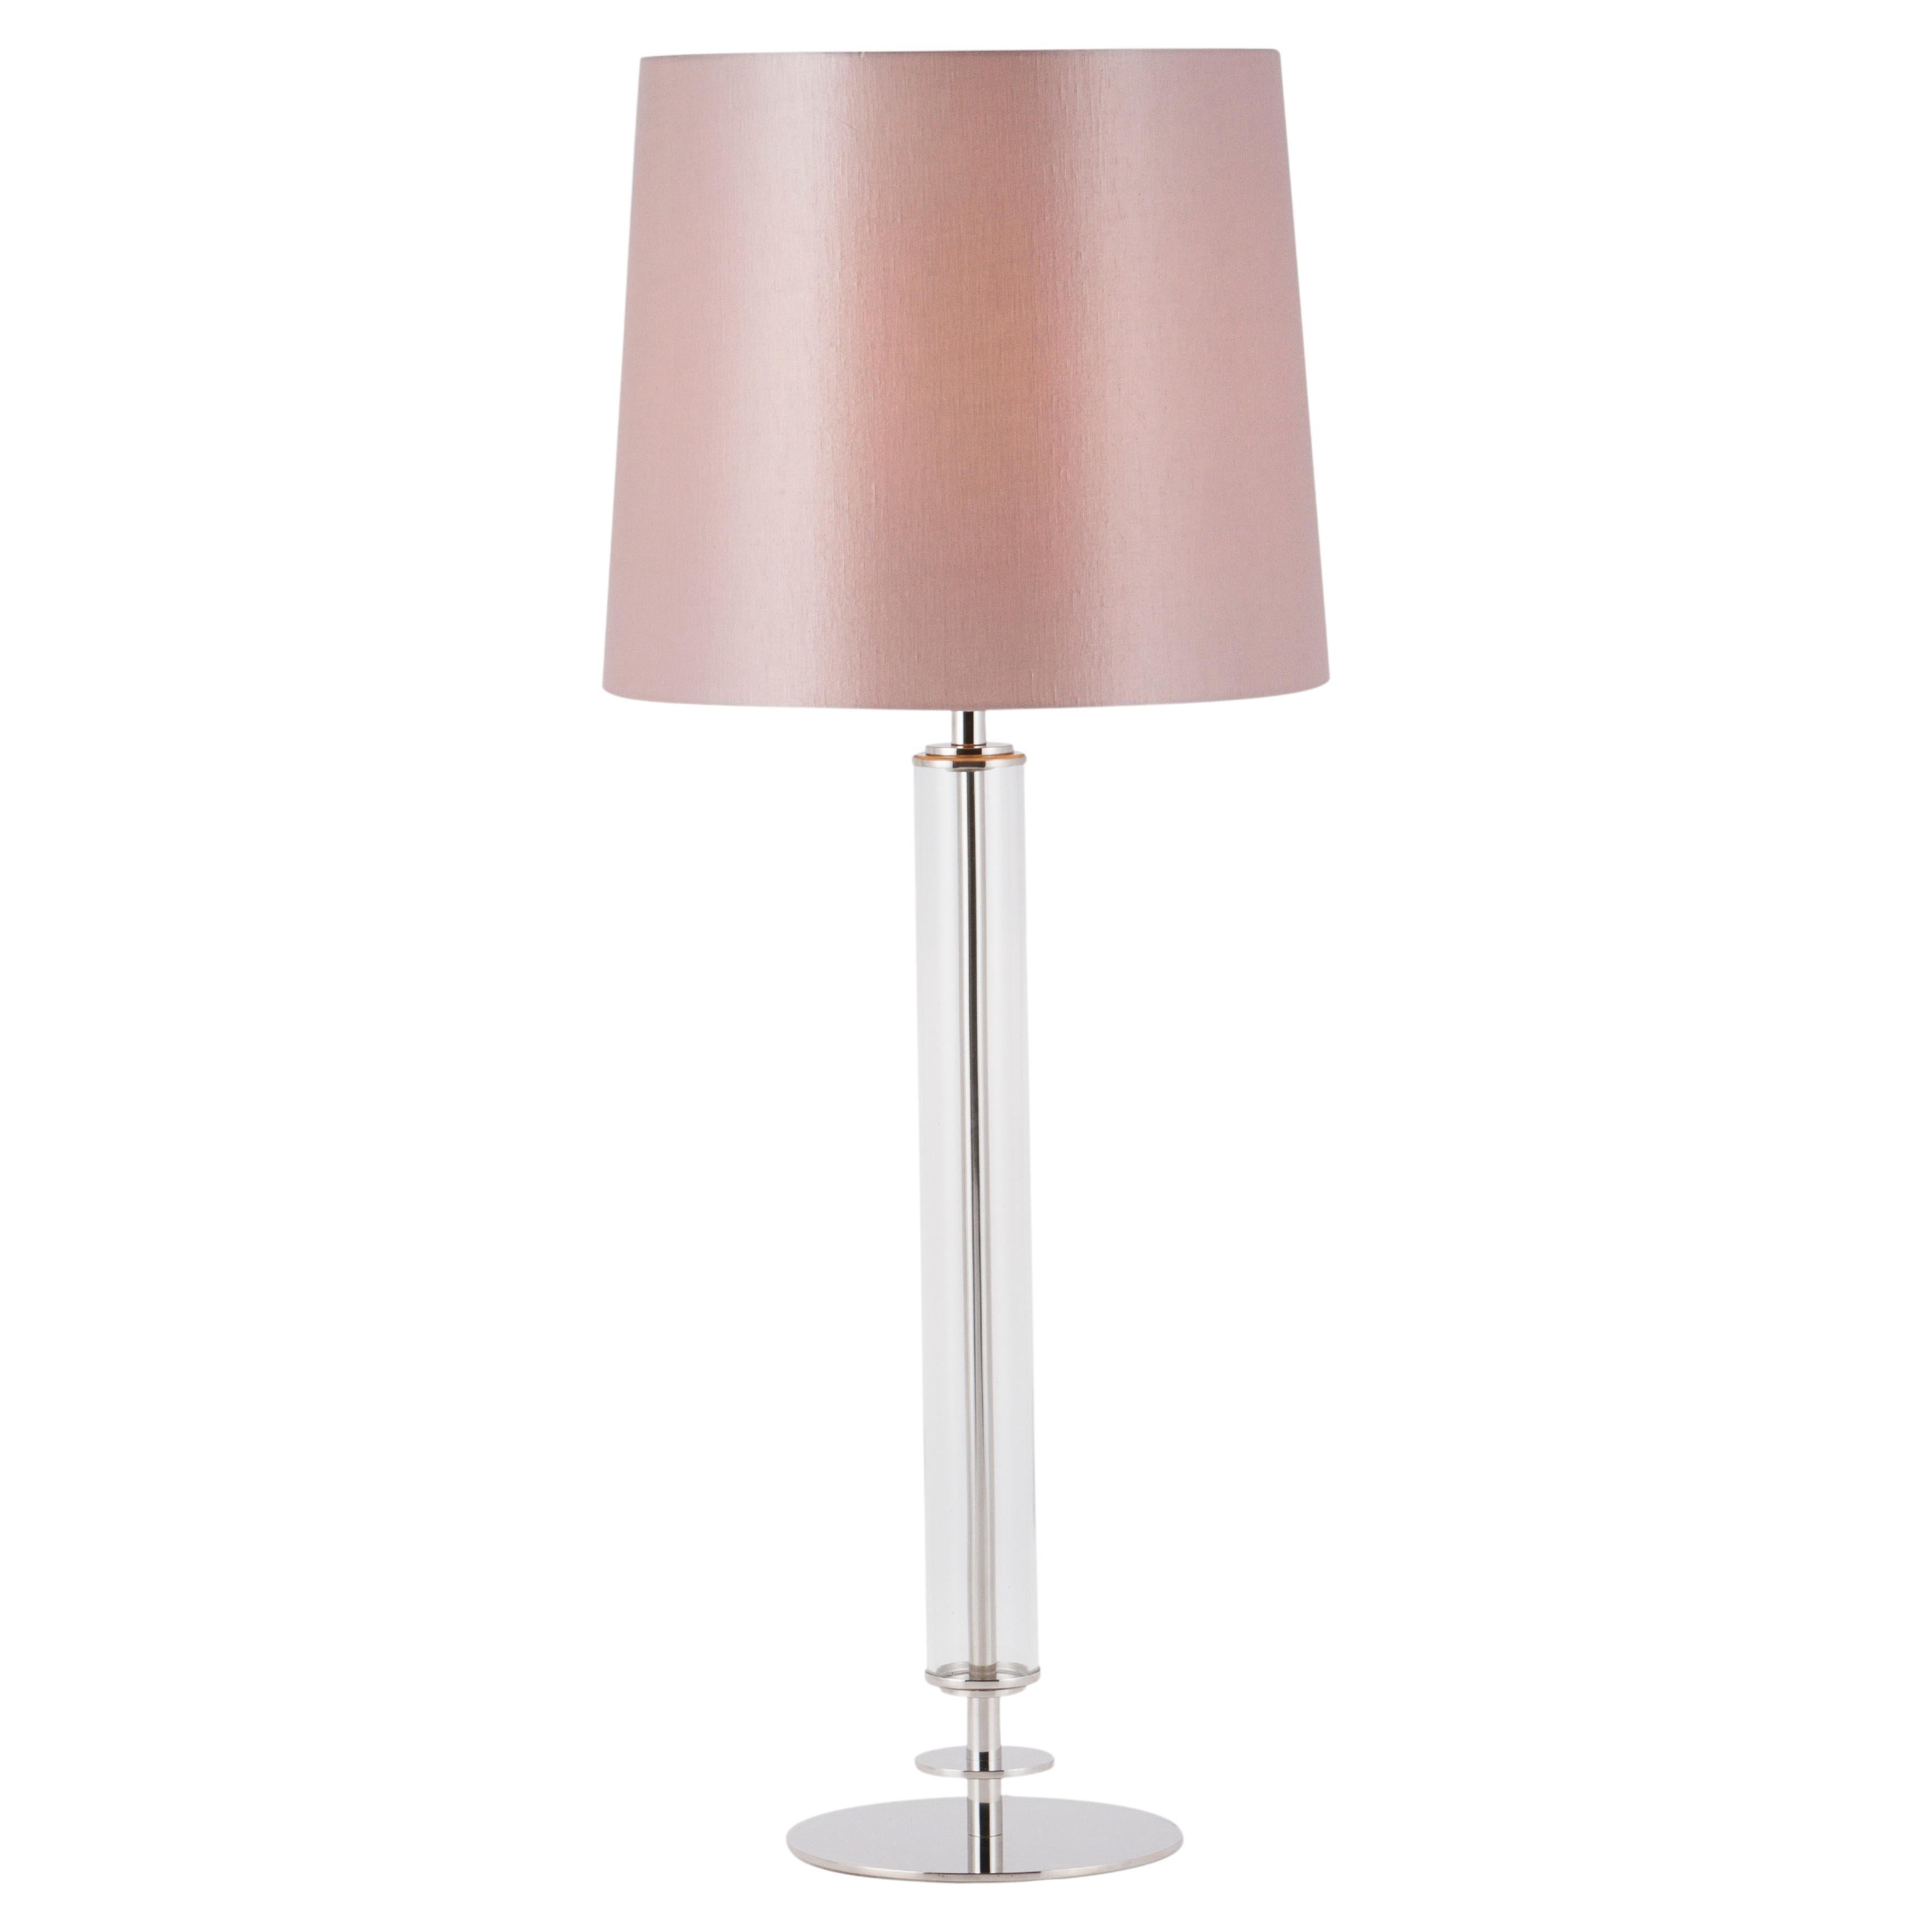 Art Deco Style Dumont Table Lamp with Pink Lampshade by Greenapple